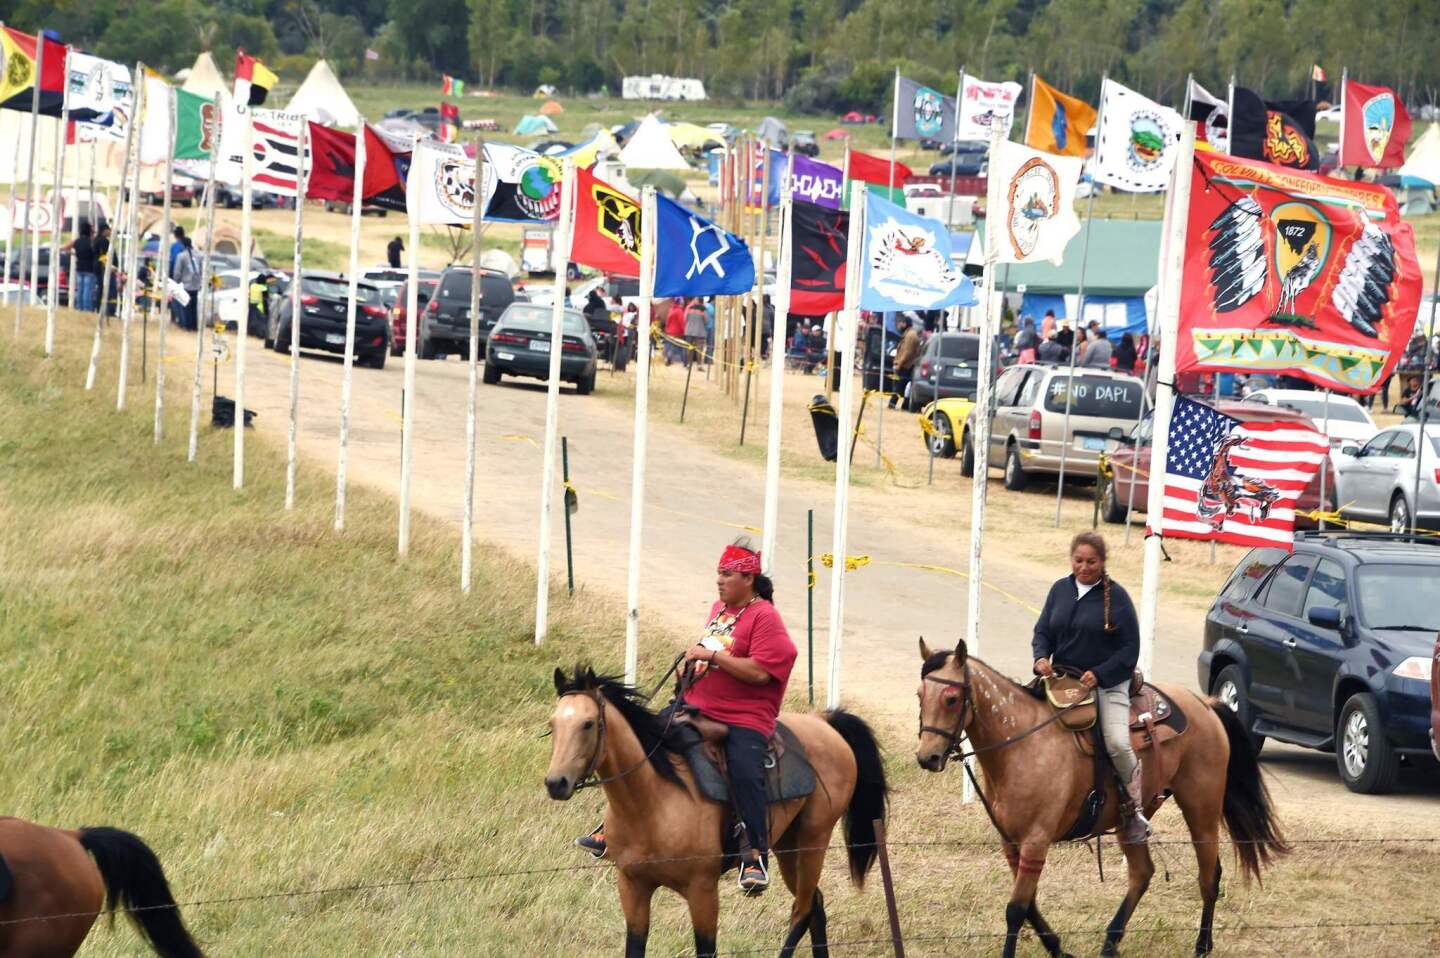 Flags of Native American tribes from across the U.S. and Canada line the entrance to a protest encampment near Cannon Ball, N.D., where members of the Standing Rock Sioux tribe and their supporters have gathered to voice their opposition to the Dakota Access Pipeline.